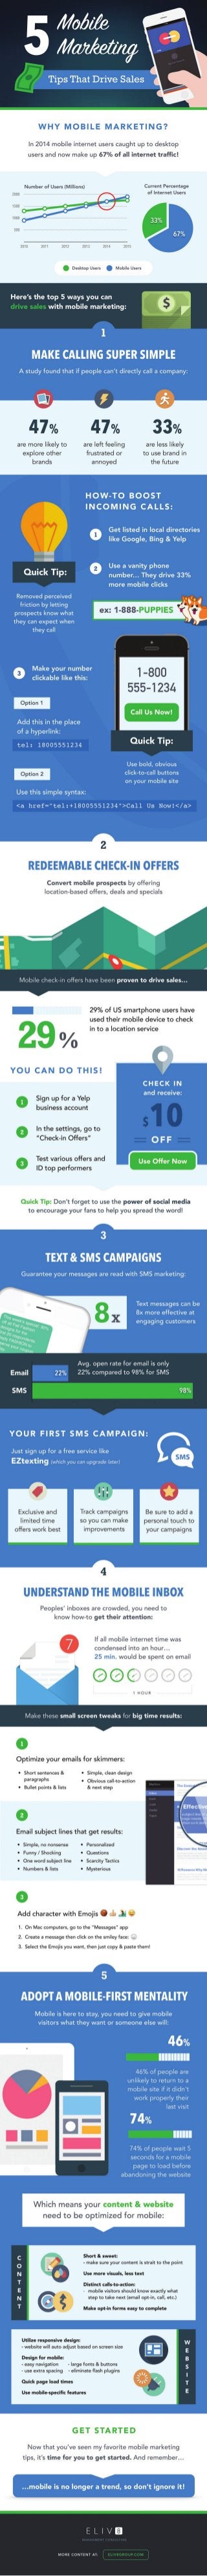 5 Mobile Marketing Tips That Drive Sales (Infographic)